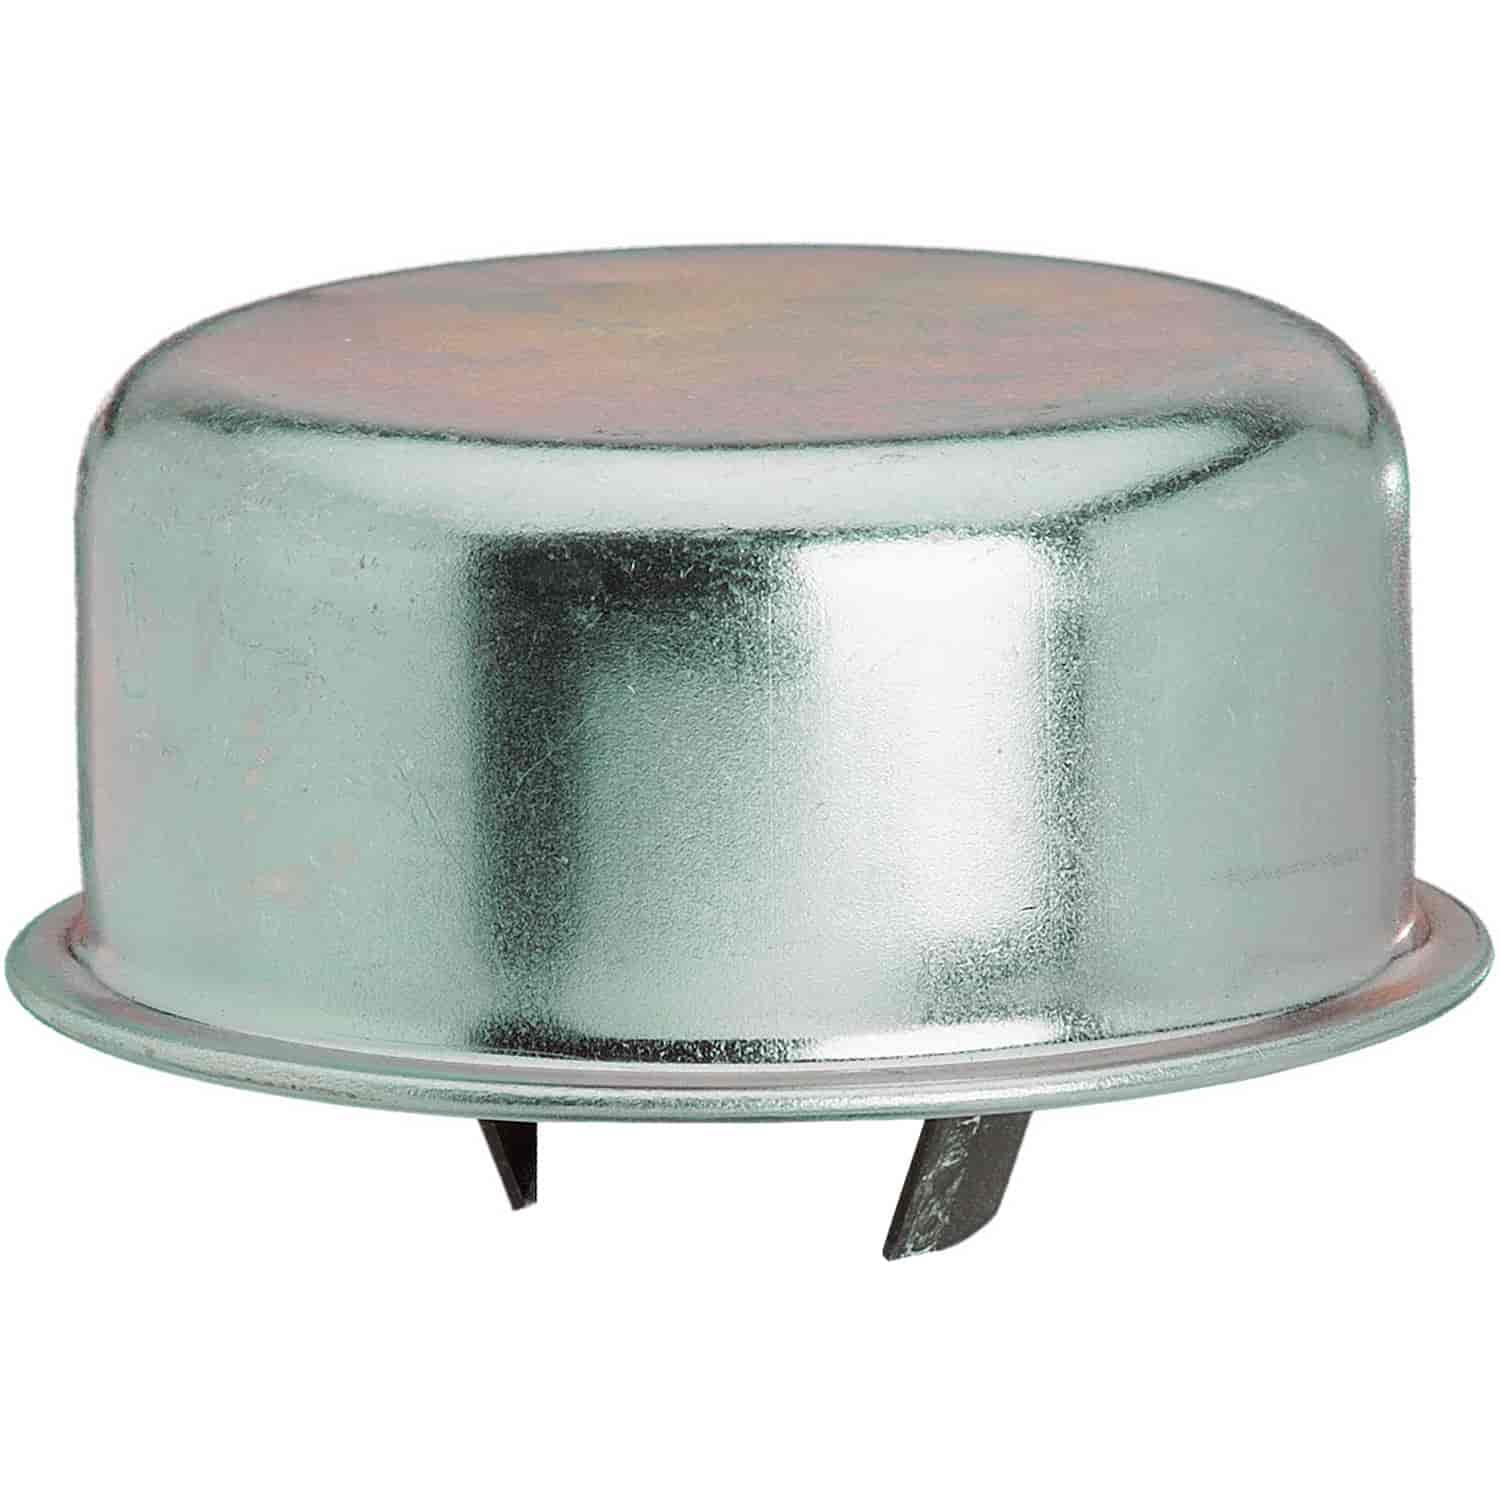 Oil Filler Cap for Select 1939-1968 Buick, Cadillac, Chrysler, Dodge, Edsel, Ford, GMC, Jeep, Lincoln, Mercury, Oldsmobile